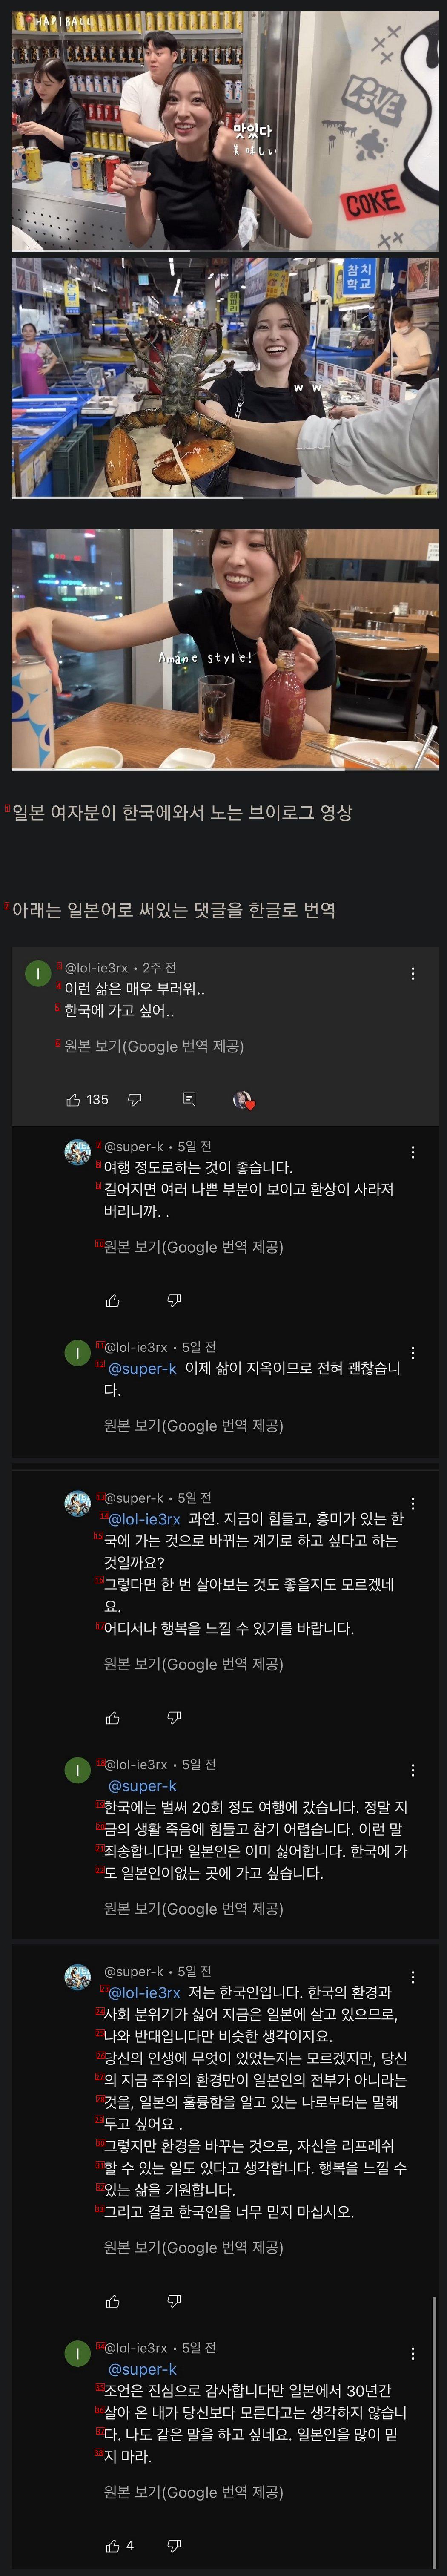 Koreans and Japanese arguing through comments on YouTube